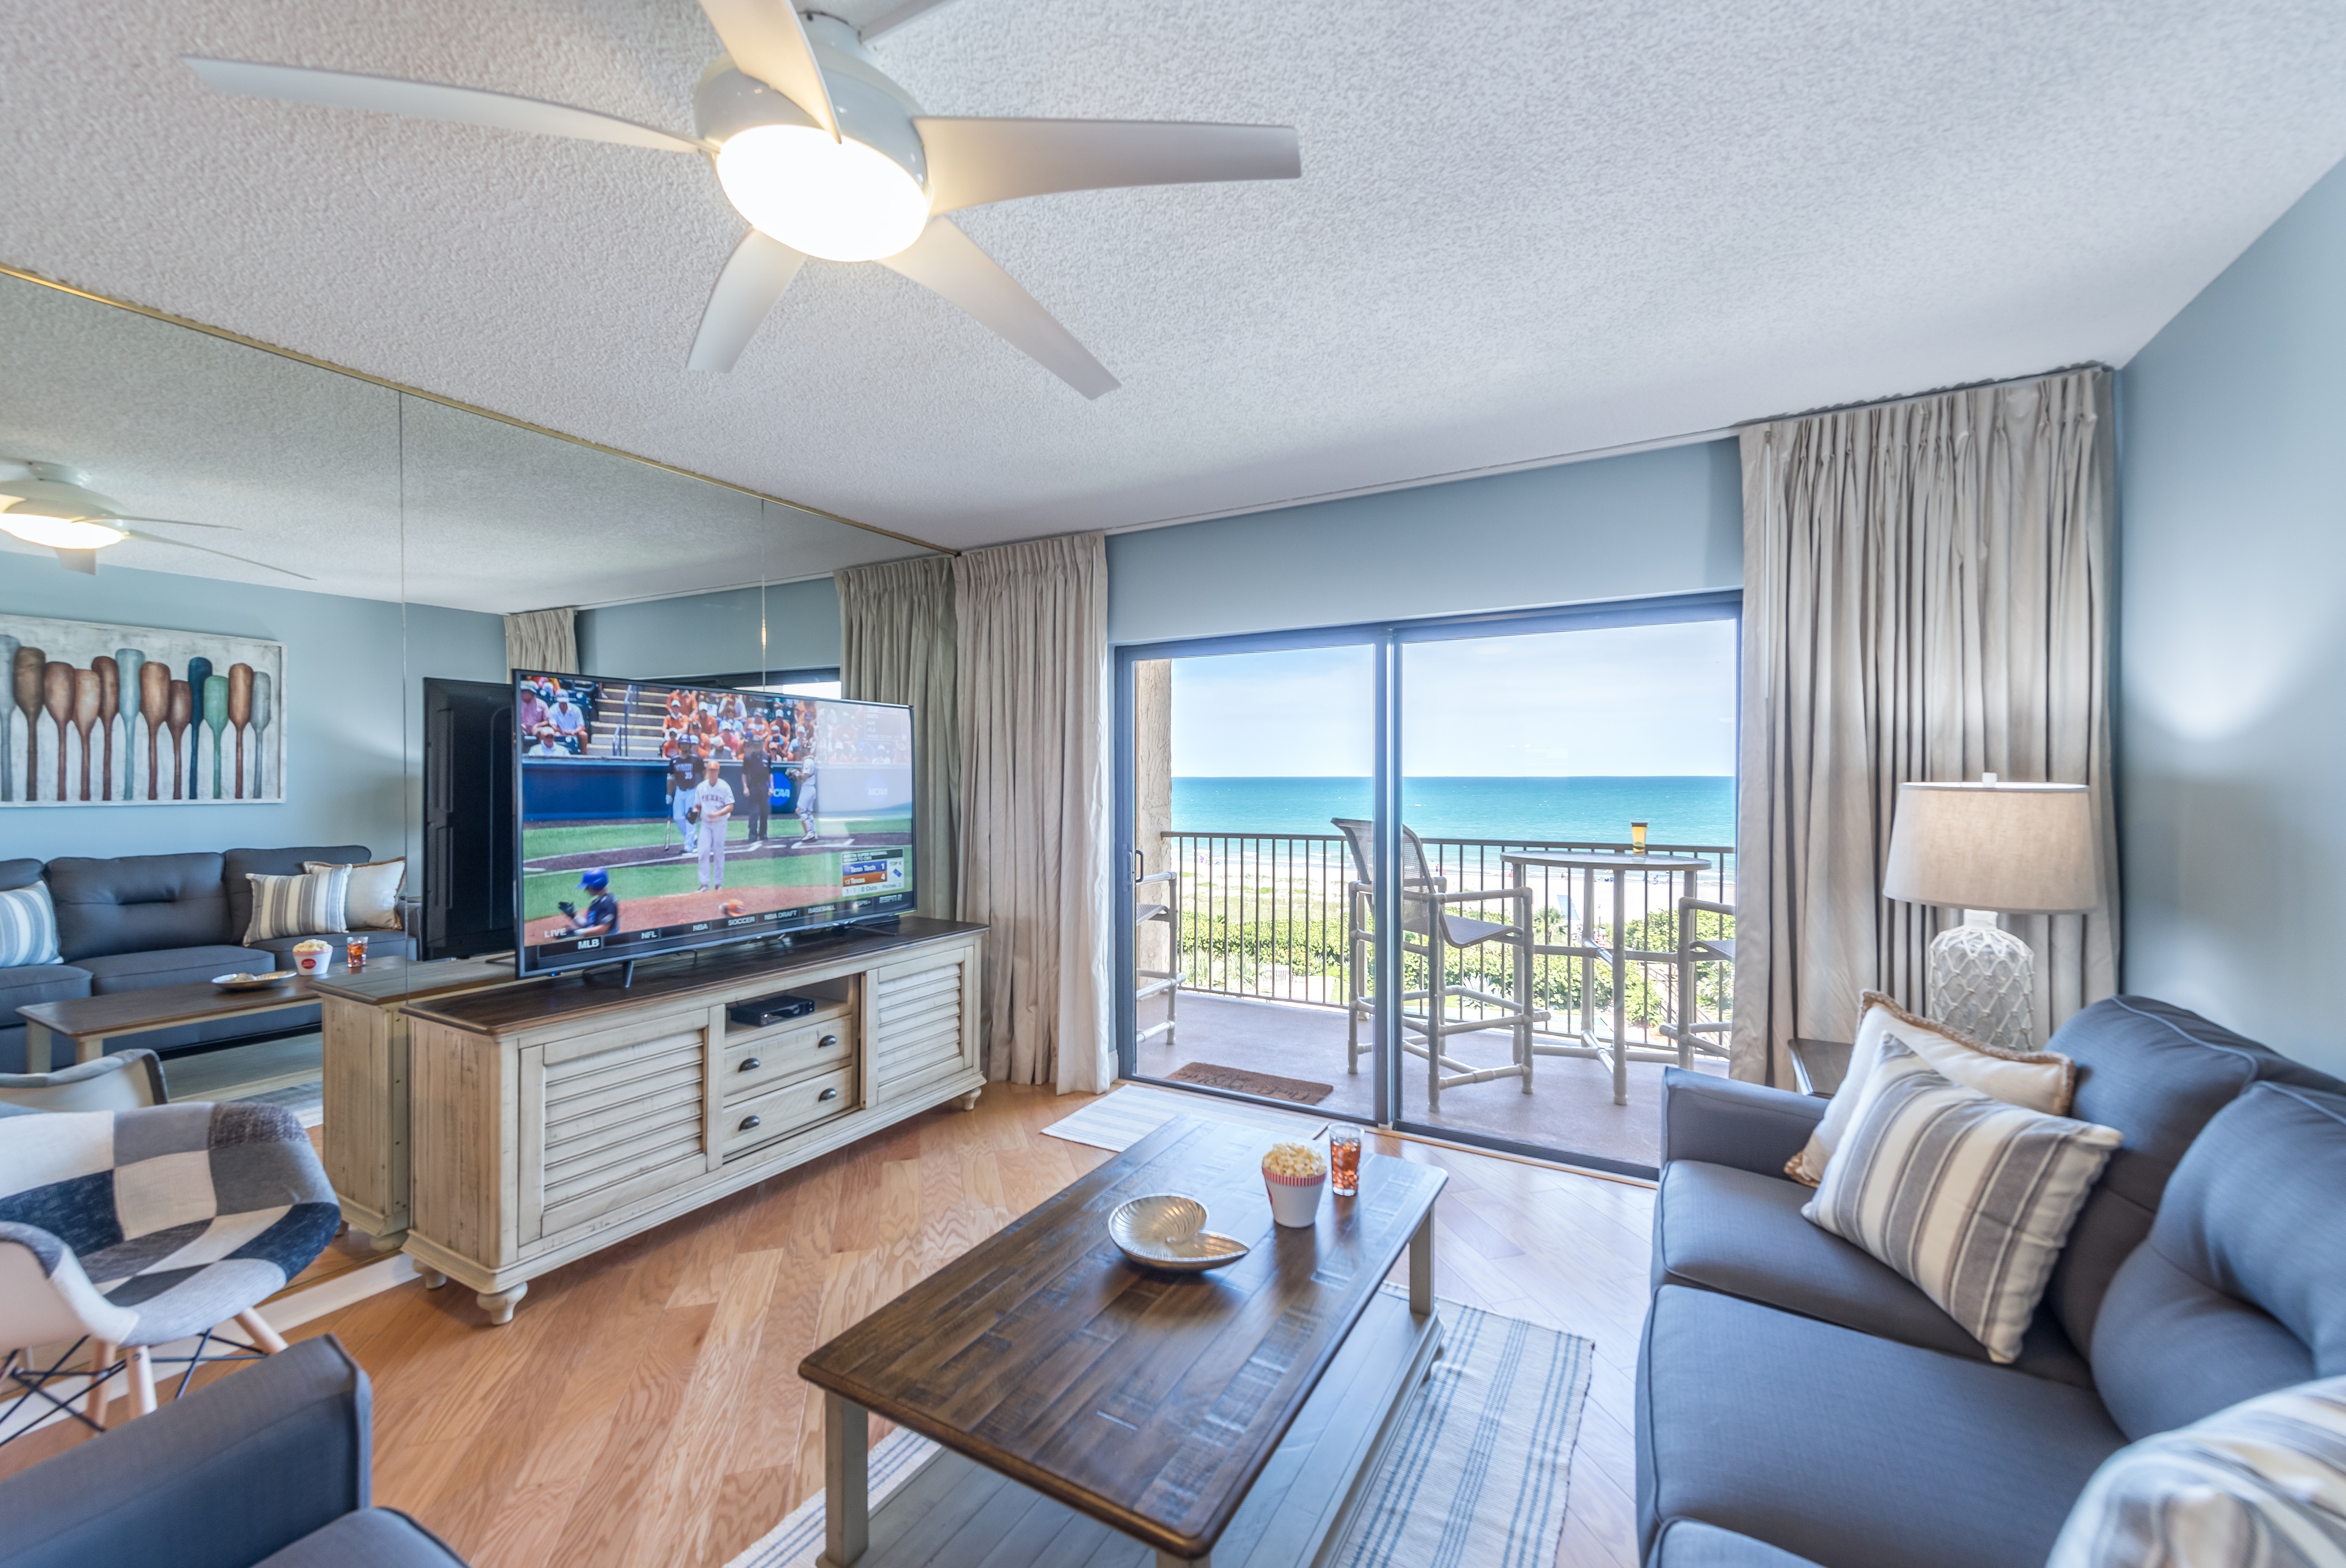 Catch the big game on this 65" HD TV with amazing views of the ocean!